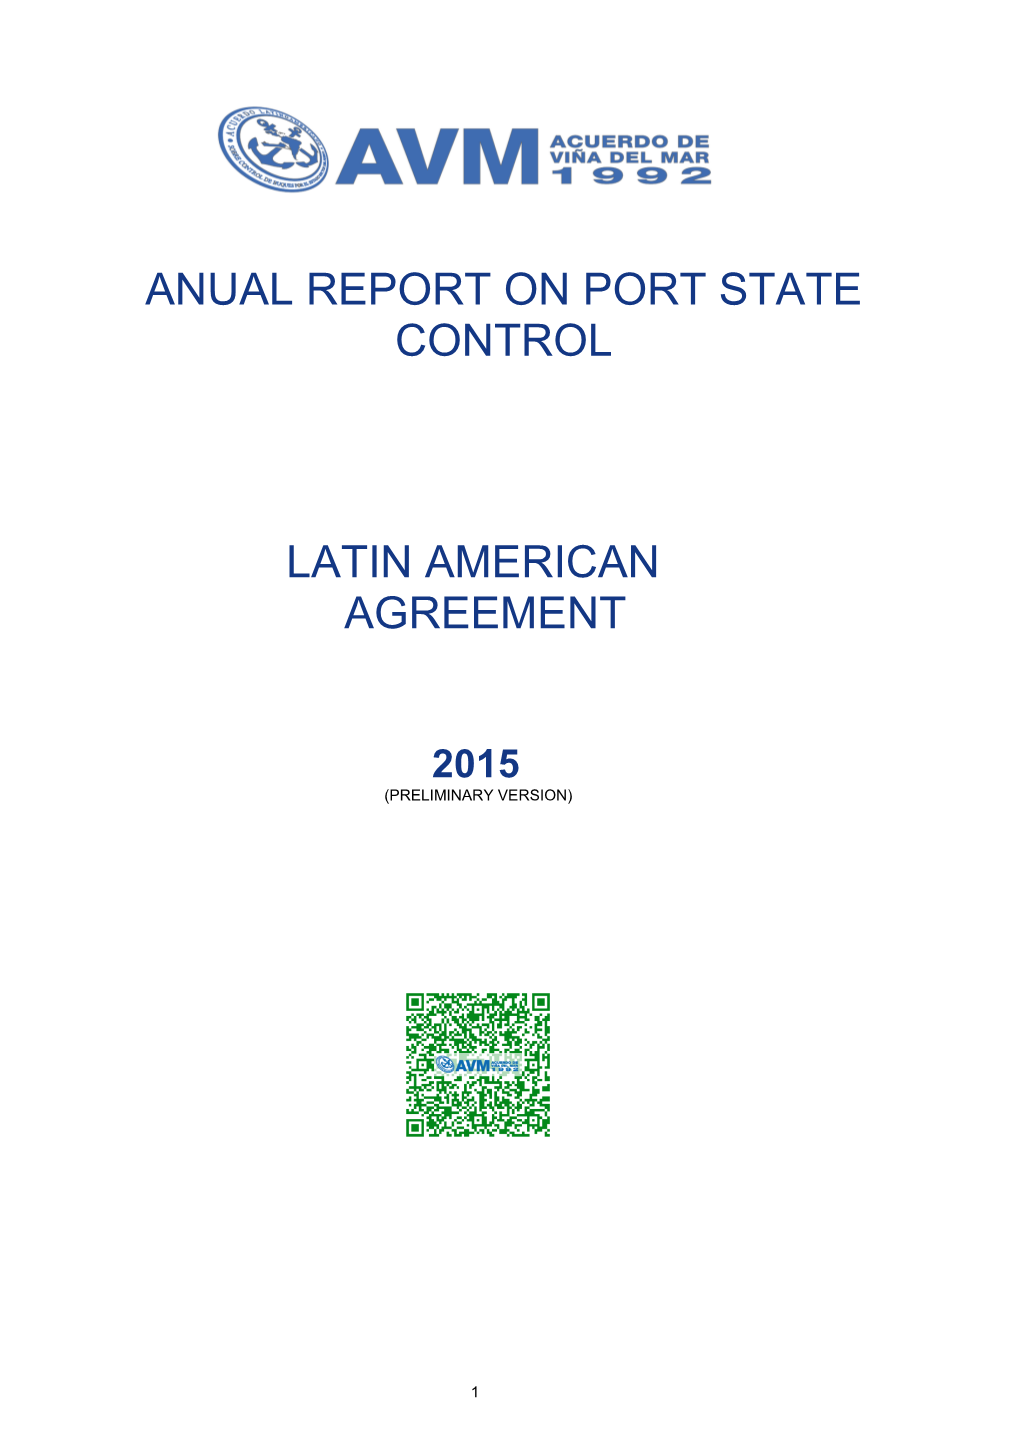 Anual Report on Port State Control Latin American